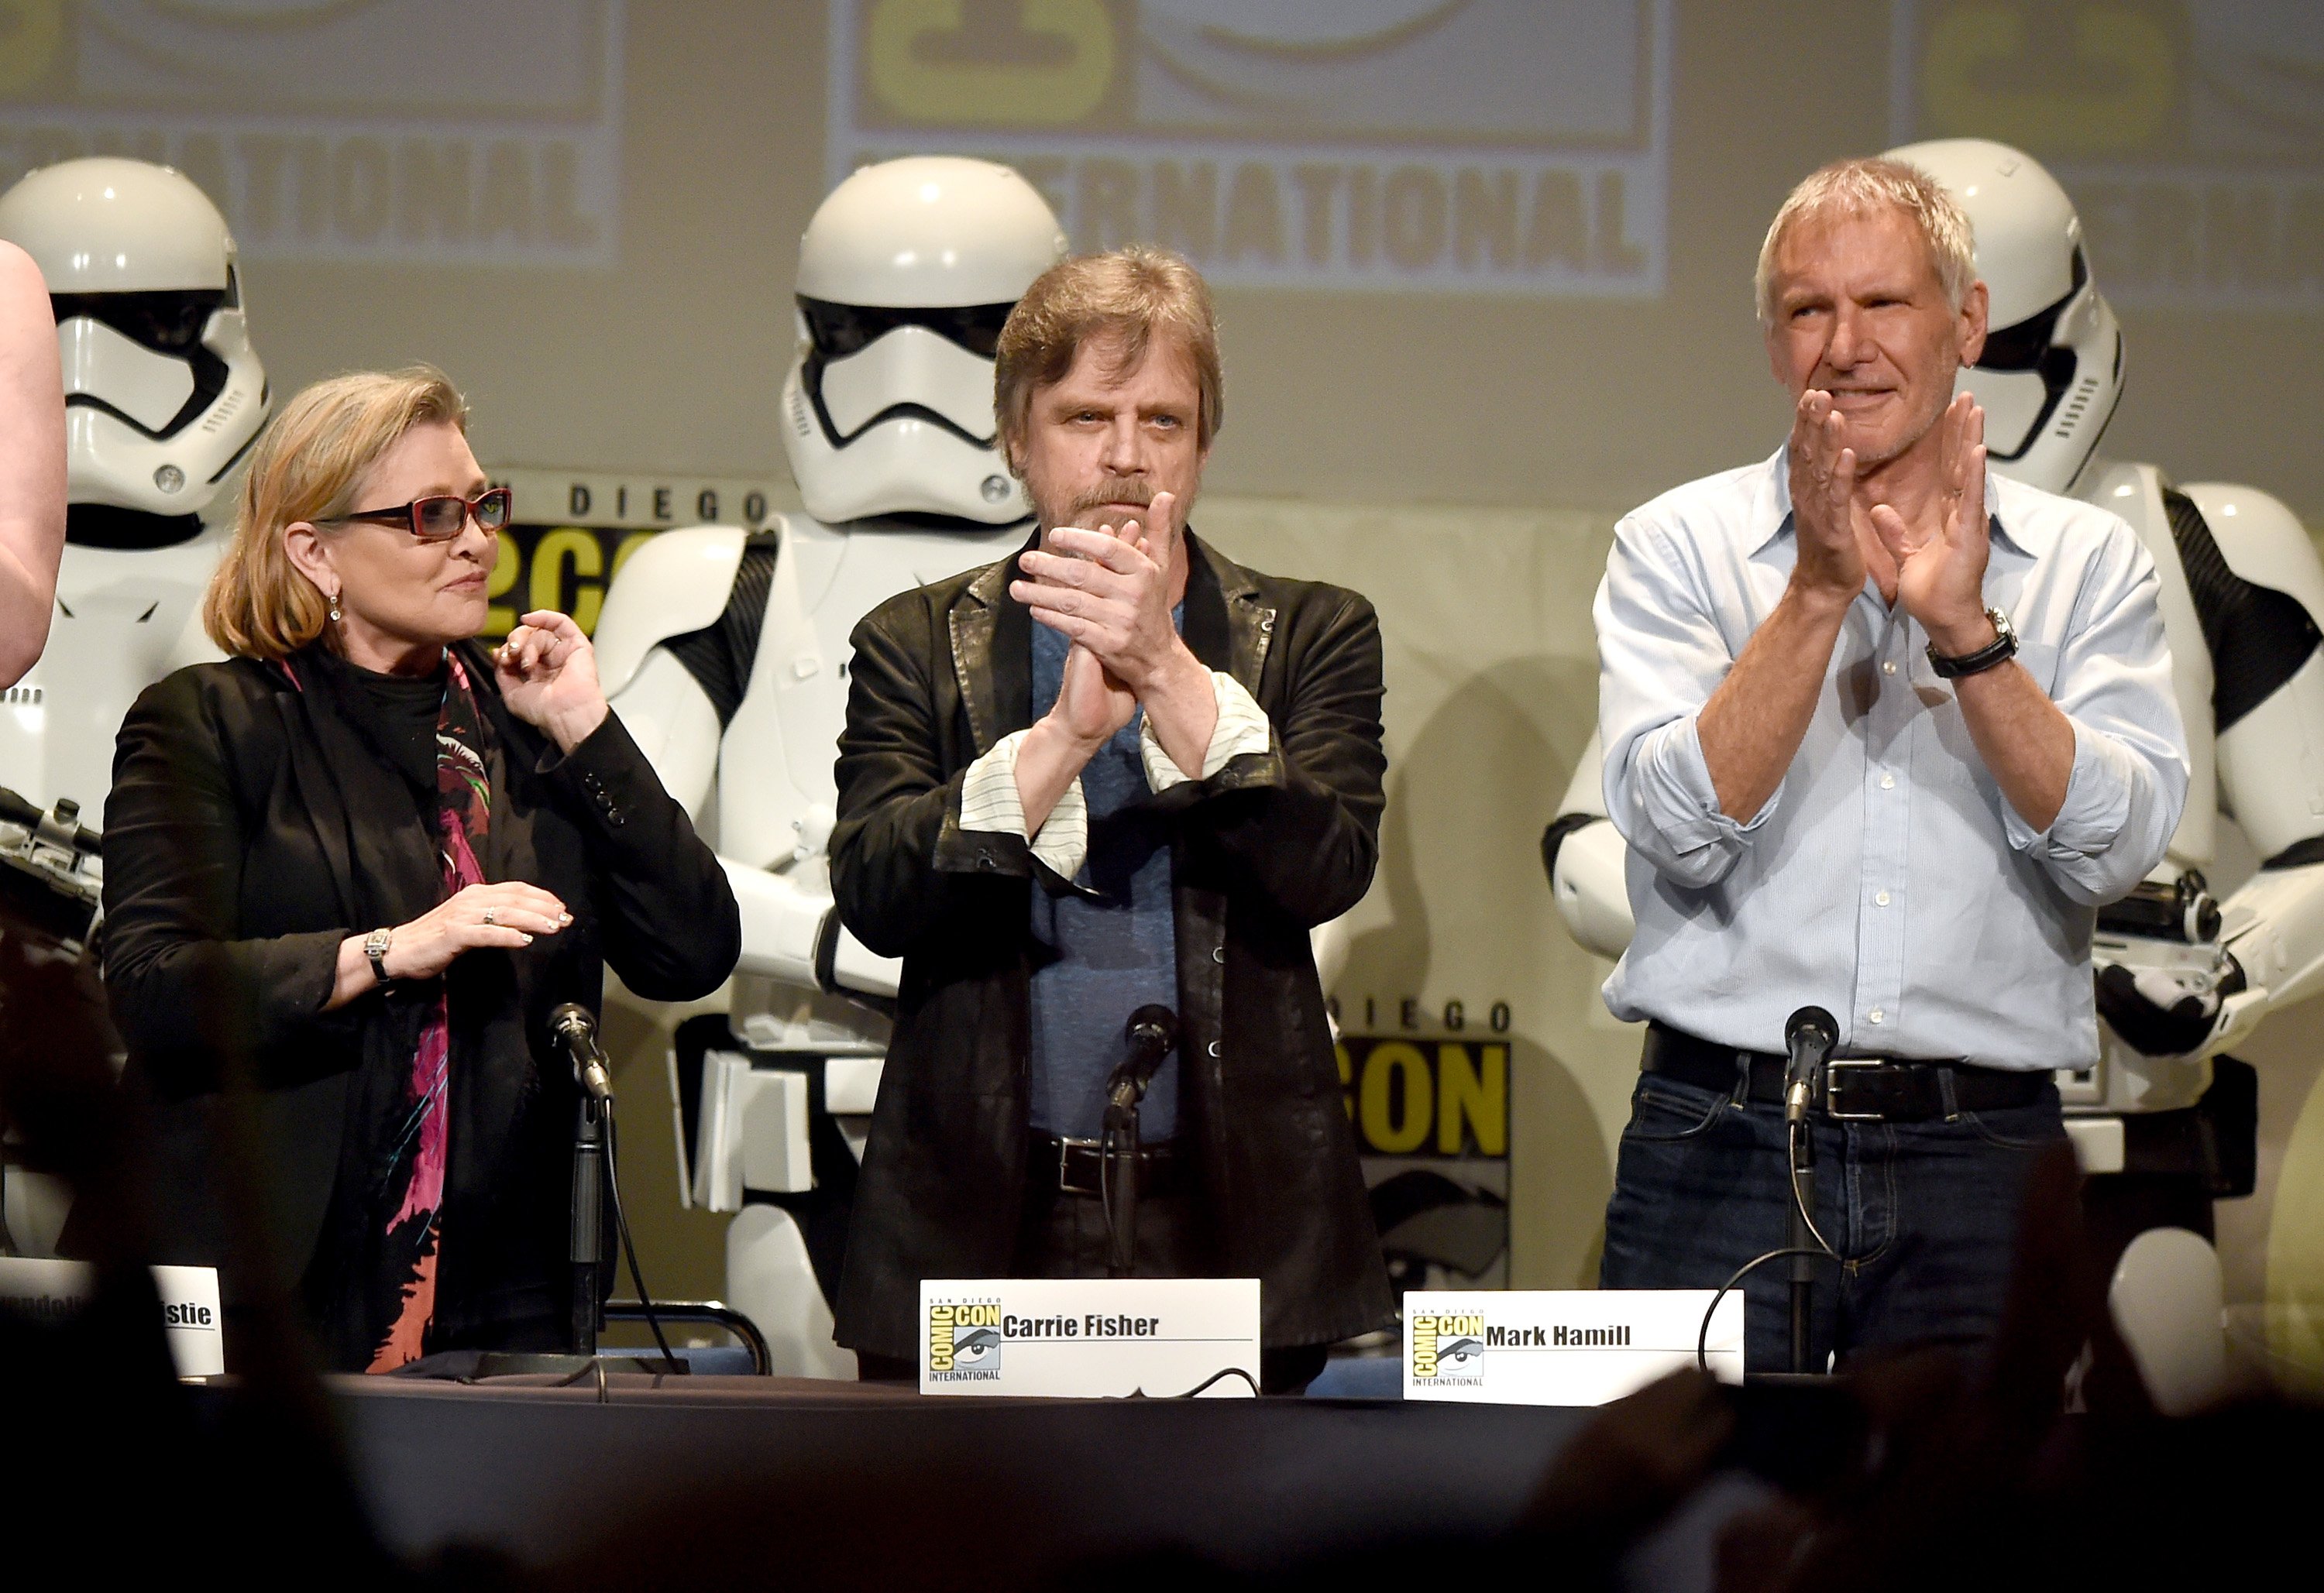 Actors Carrie Fisher, Mark Hamill and Harrison Ford applaud onstage at the Lucasfilm panel during Comic-Con International 2015 at the San Diego Convention Center on July 10, 2015 in San Diego, California.